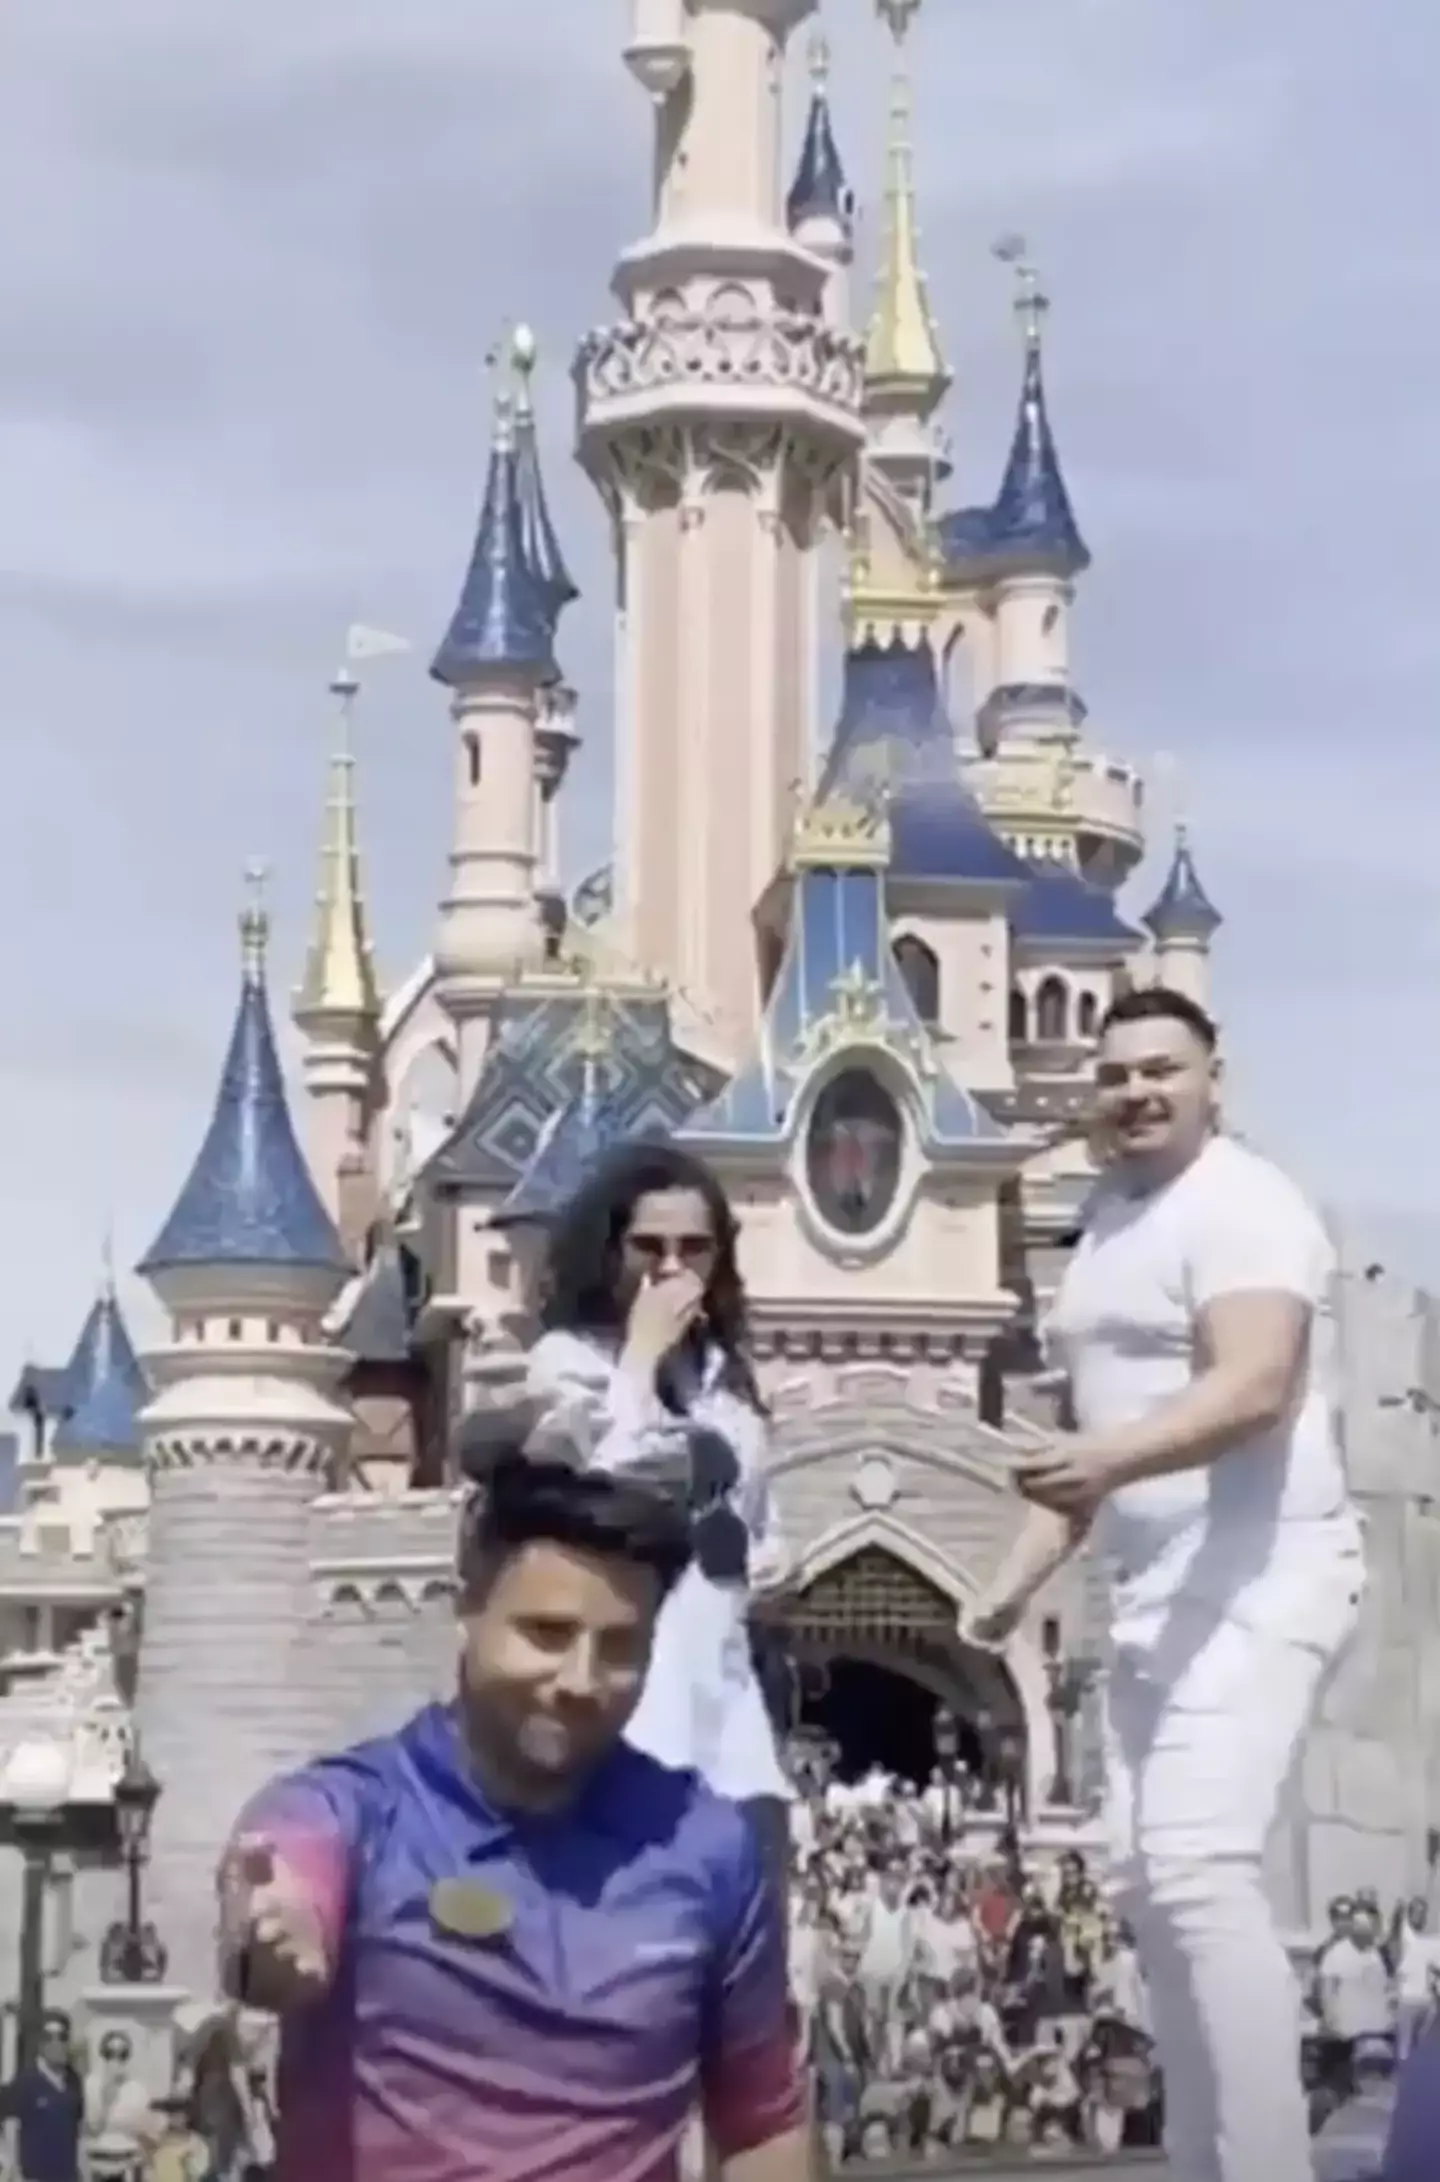 A dream proposal at Disneyland Paris was ruined when an employee snatched the ring.